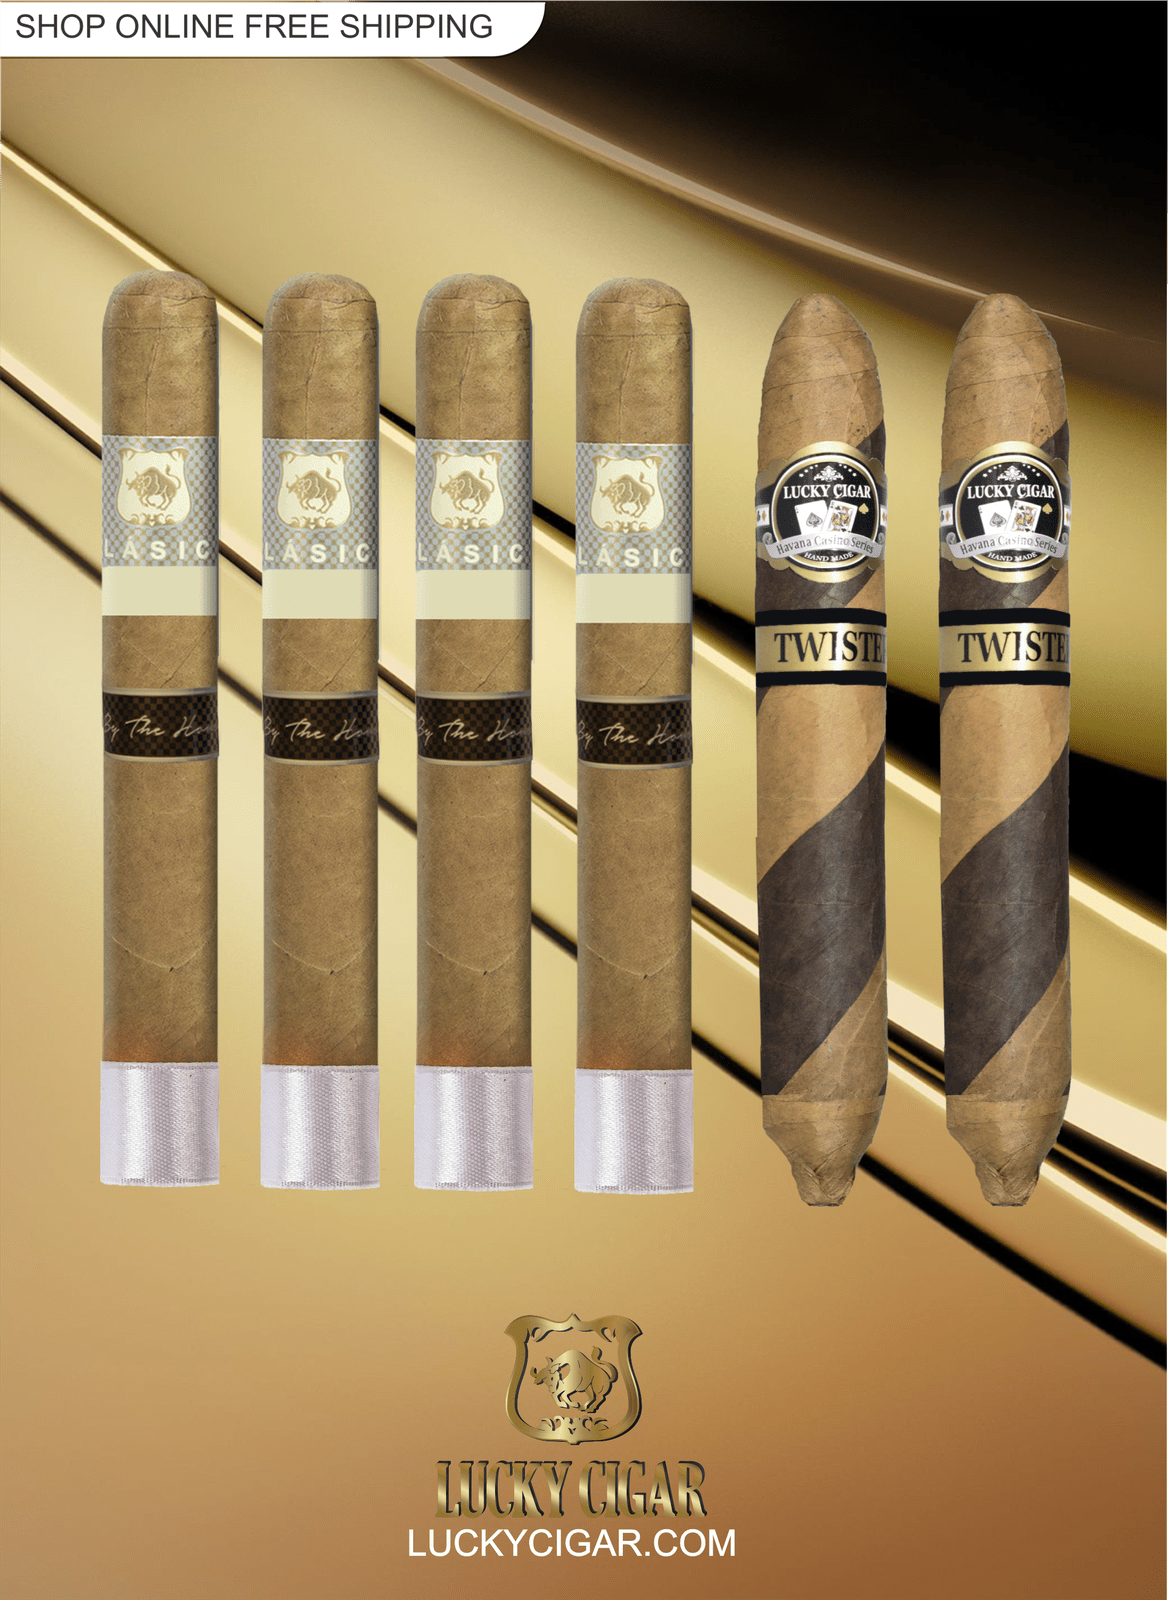 Lucky Cigar Sampler Sets: Set of 6 Cigars with Classico, Twister